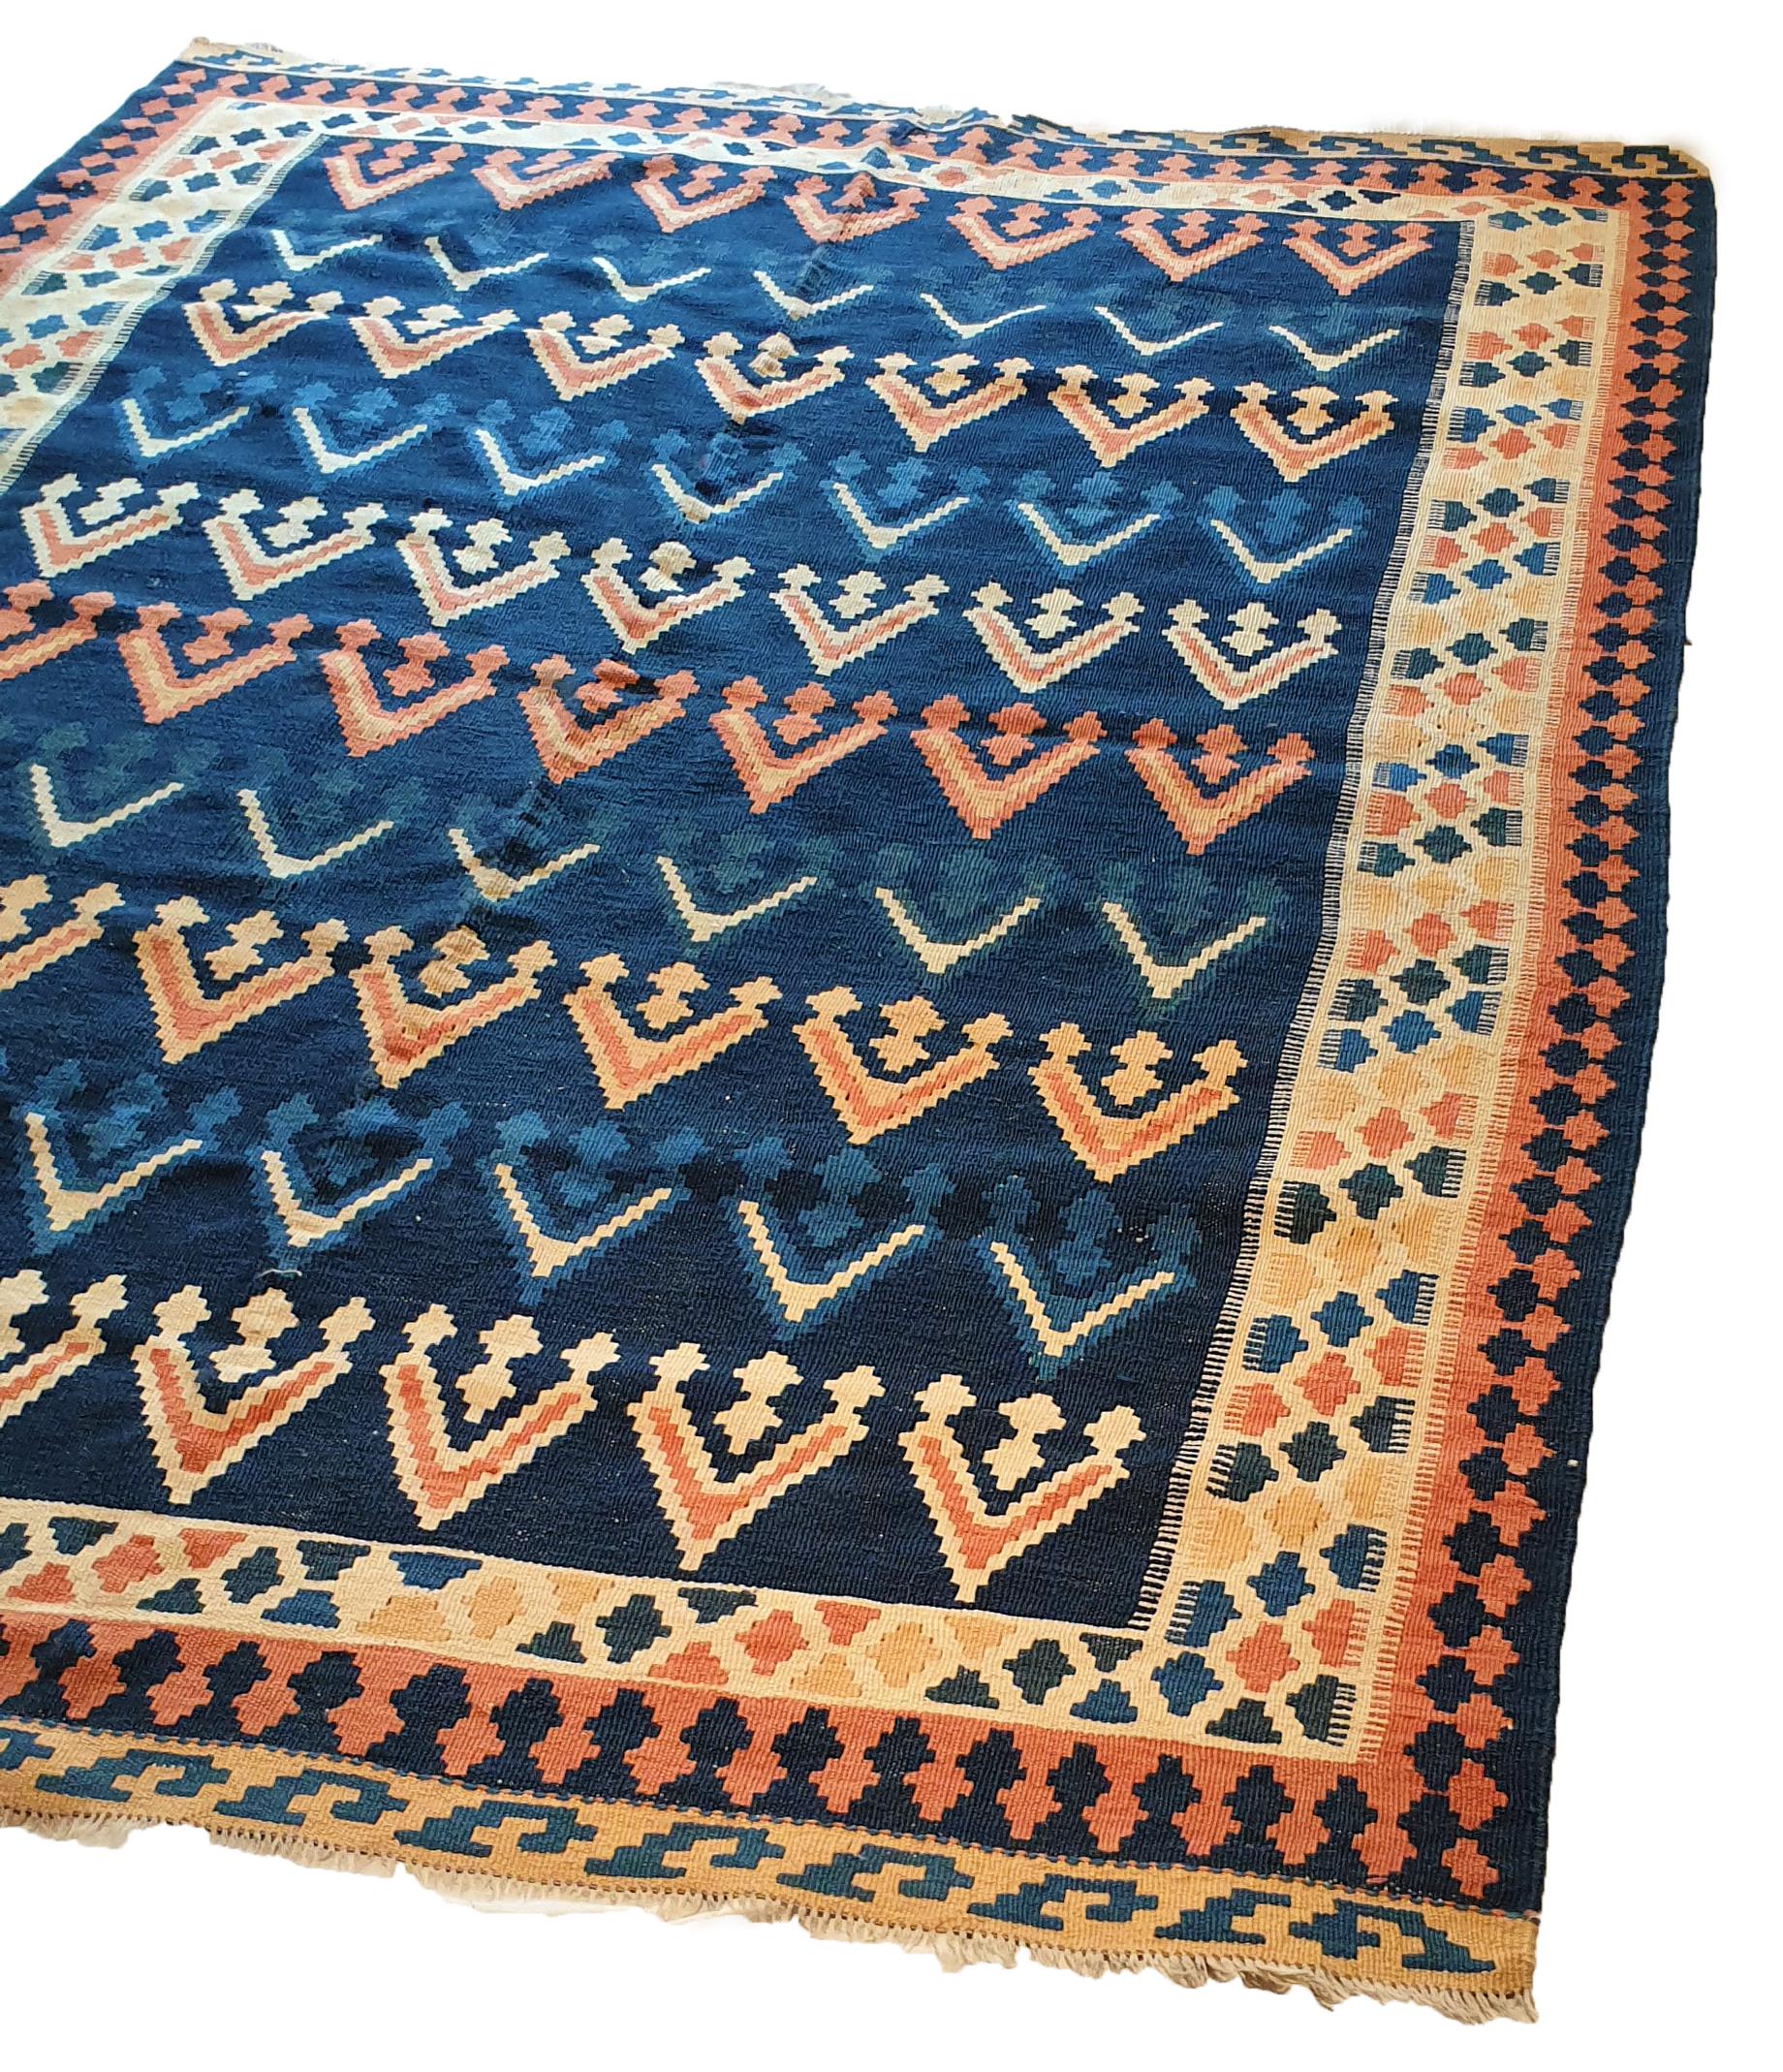 Hand knotted Kilim in orient.
High quality, beautiful graphics and remarkable finesse.
Perfect state of preservation.
Price negotiable and free delivery.

Measures: 210 cm x 165 cm.